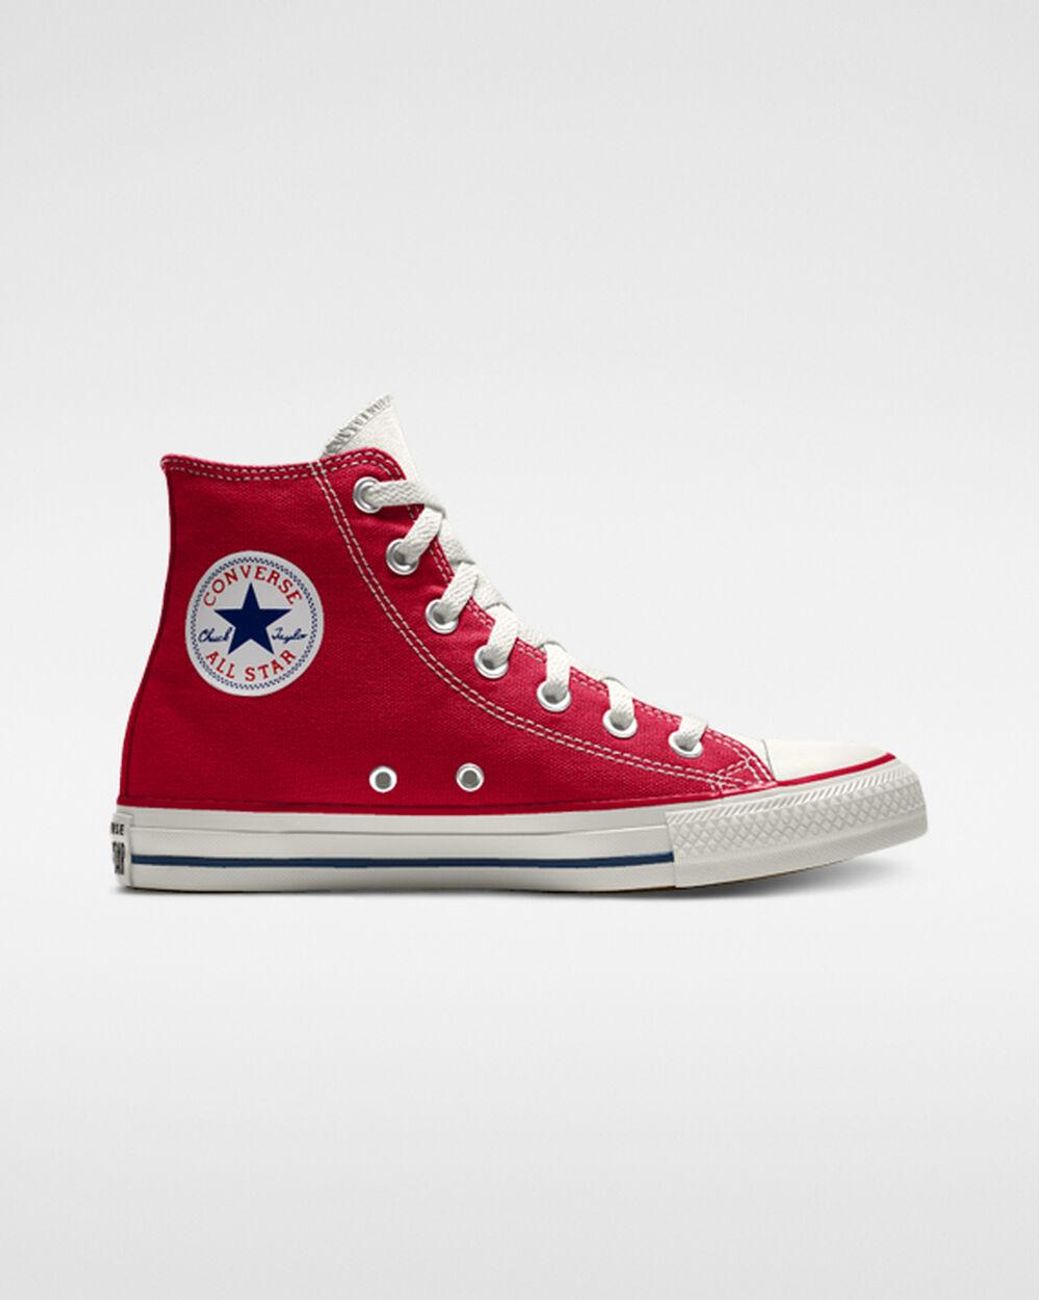 Converse Custom Chuck Taylor All Star High Top in Red for Men - Lyst